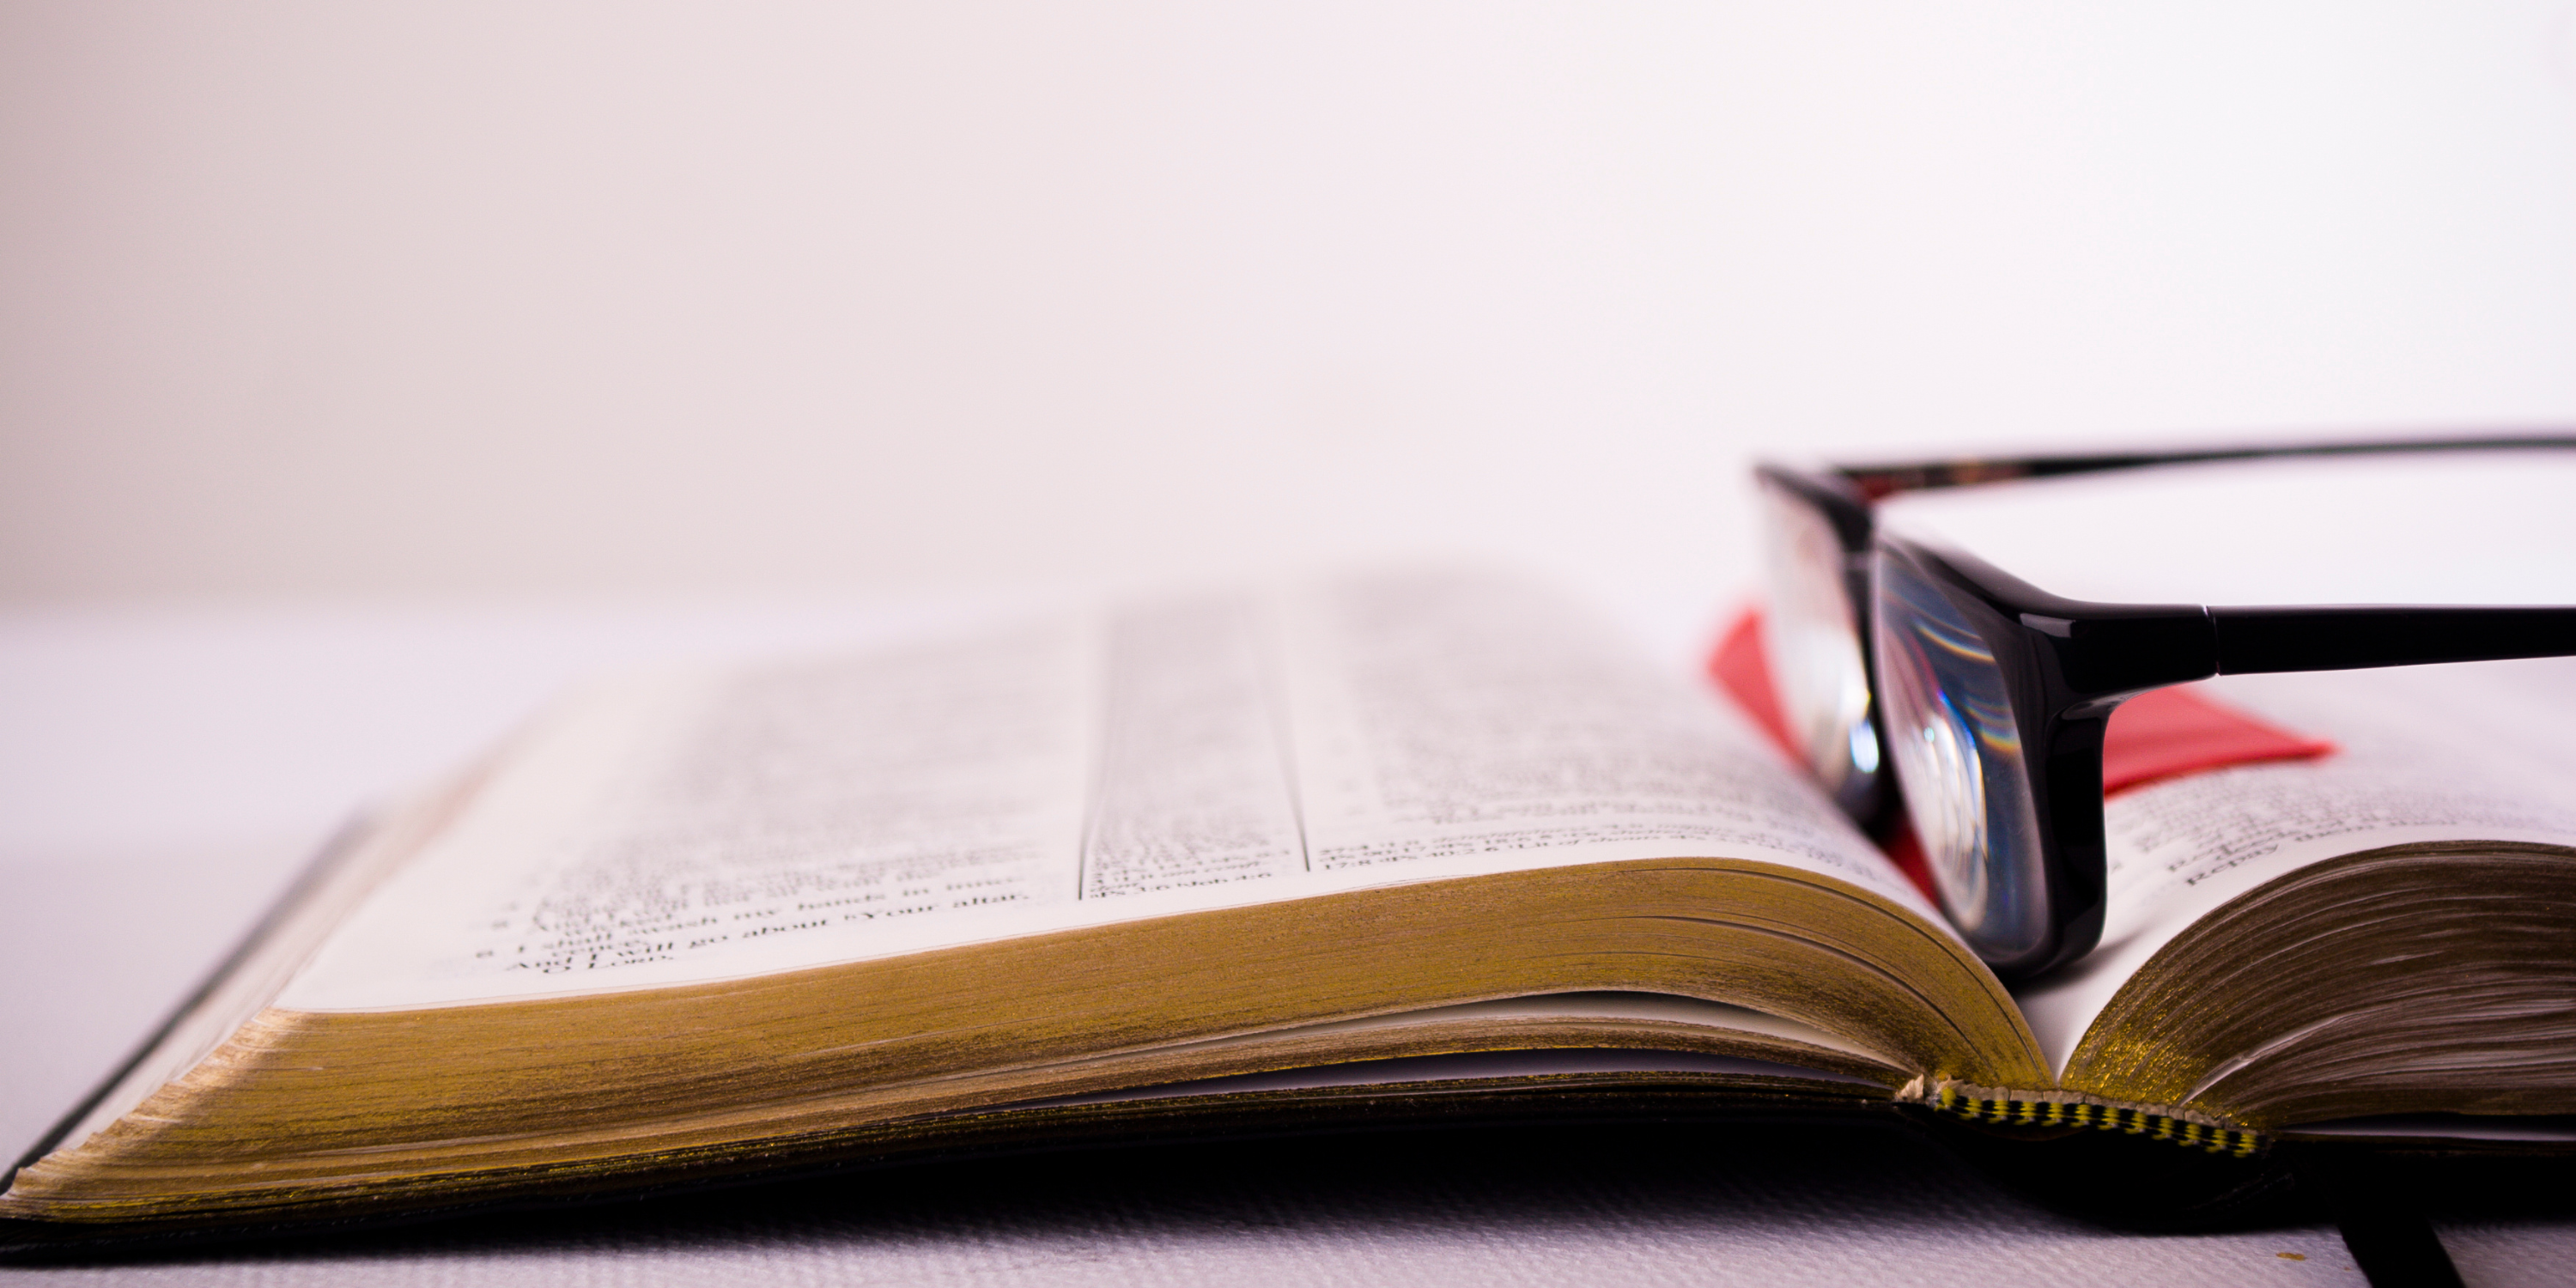 A pair of black glasses rests atop a Bible.